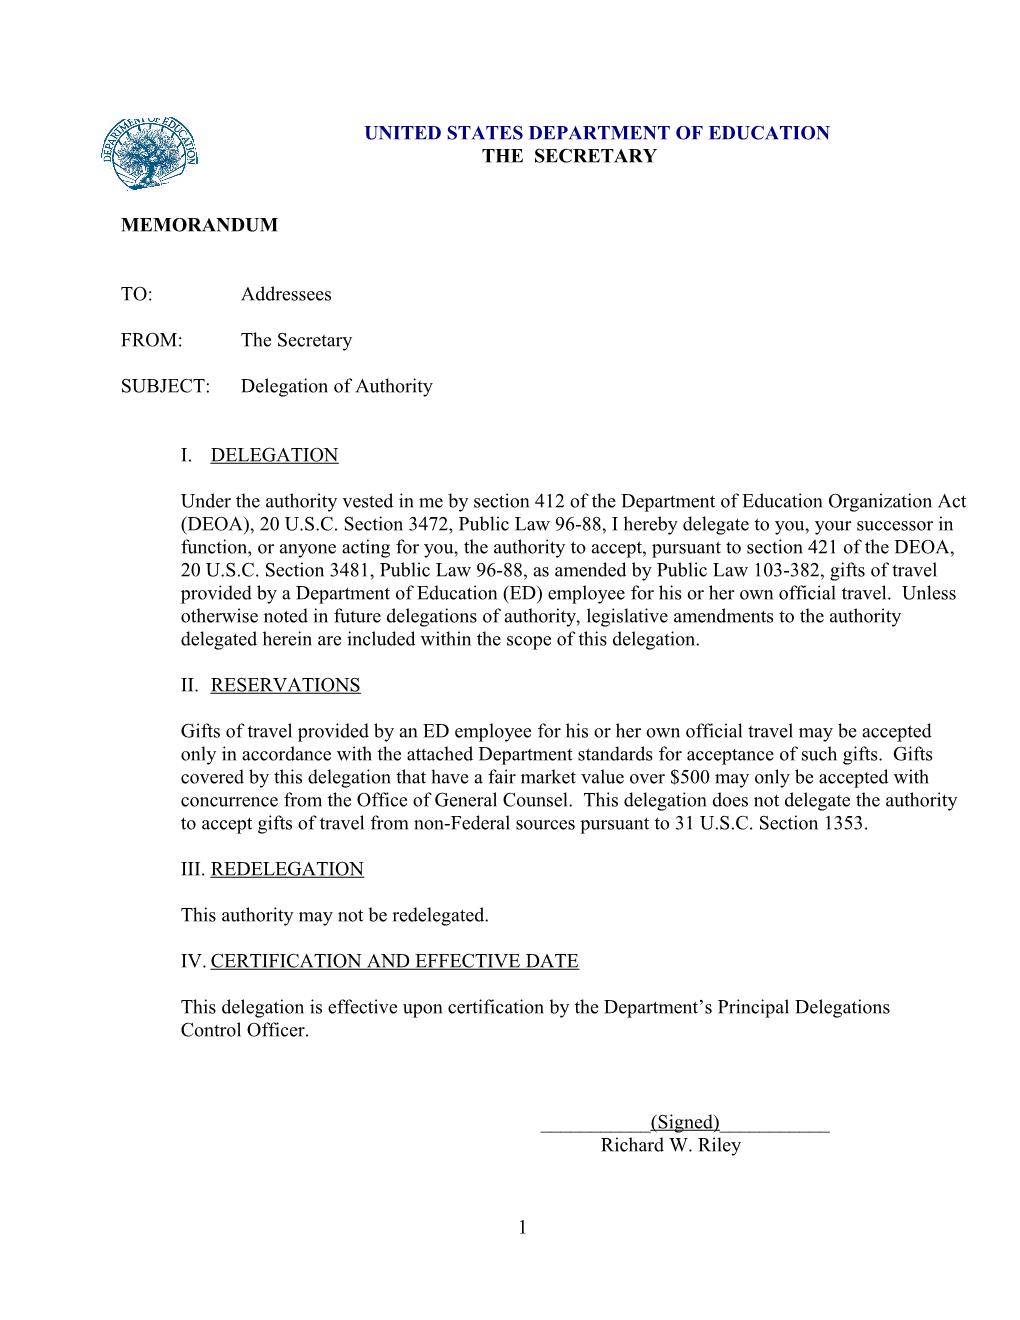 Authority to Accept Gift of Travel Provided by ED Employees October 2012 (MS Word)